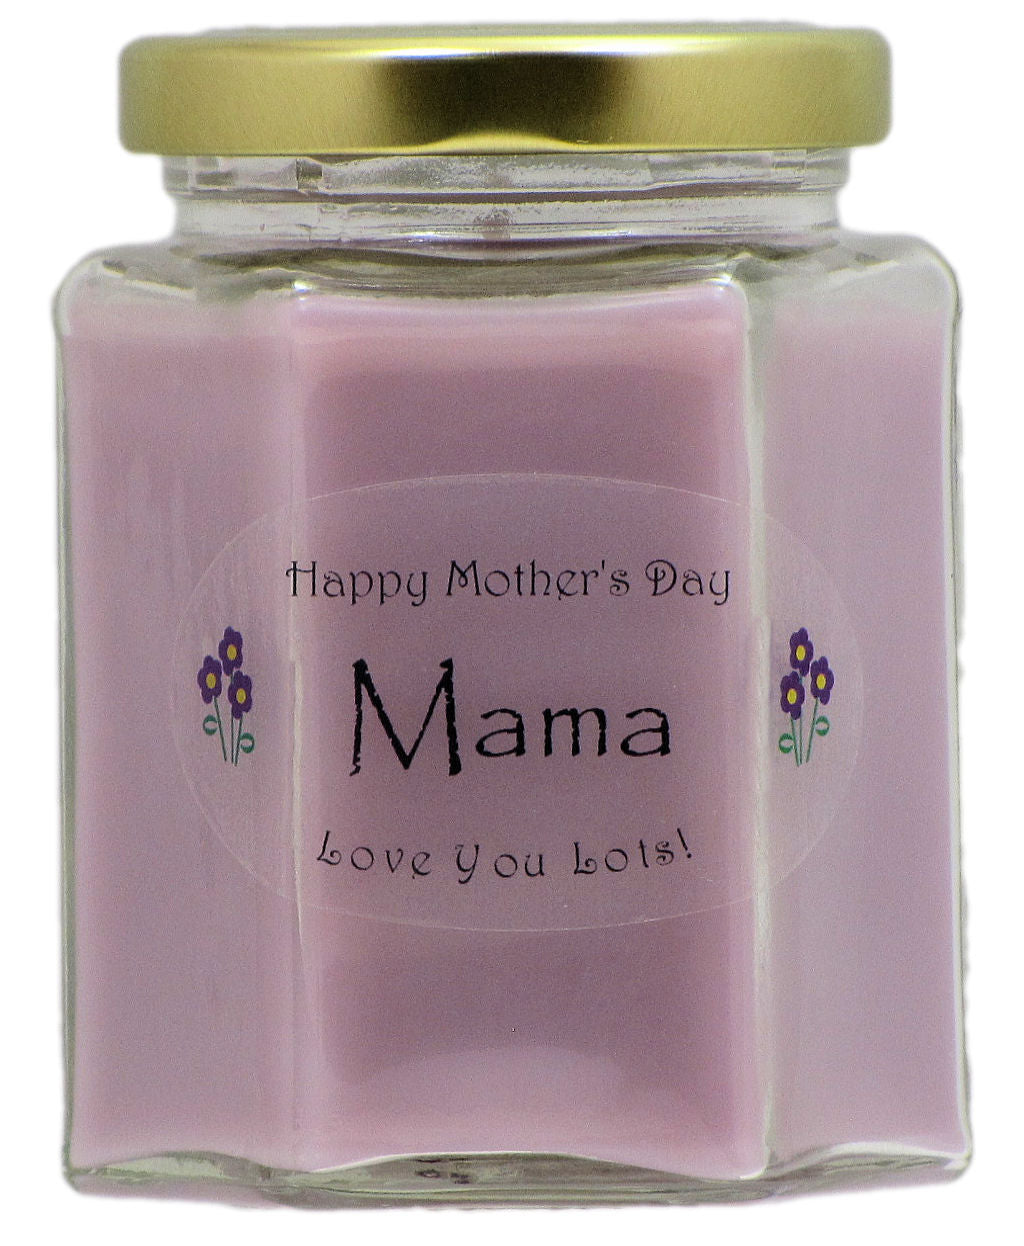 Mama - Happy Mother's Day Candles